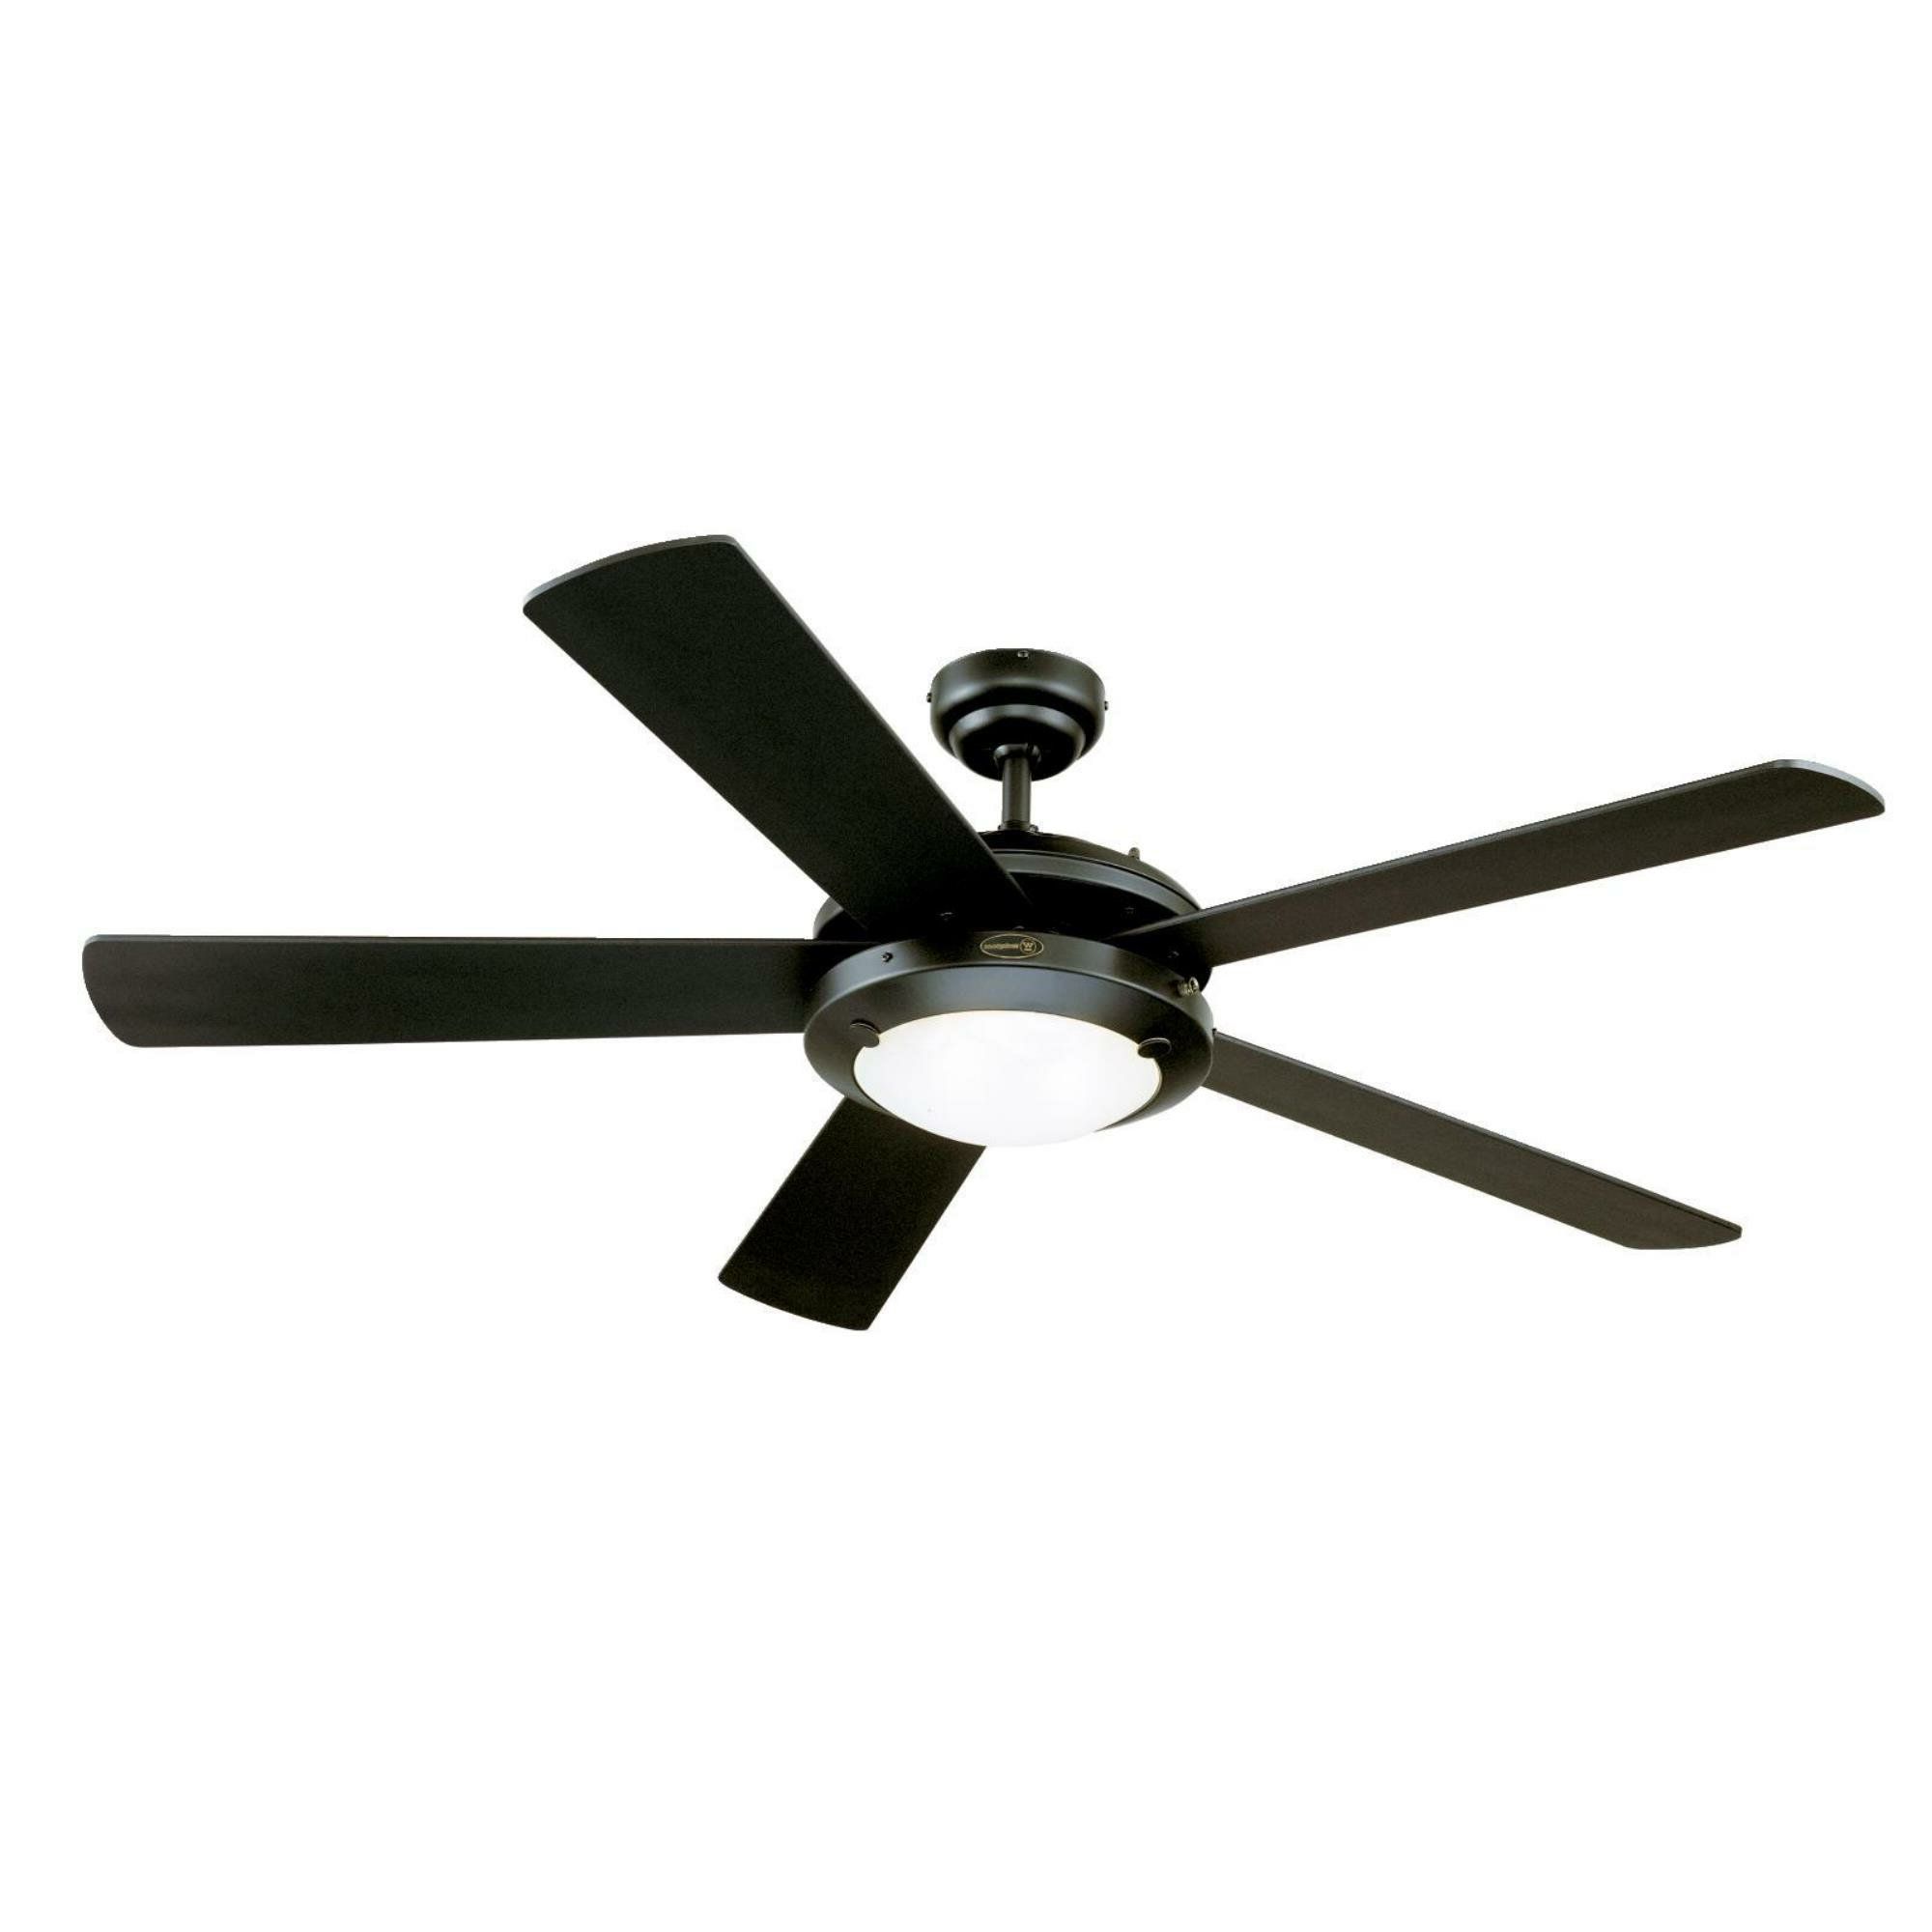 52" Creslow 5 Blade Ceiling Fan, Light Kit Included In Latest Calkins 5 Blade Ceiling Fans (View 3 of 20)